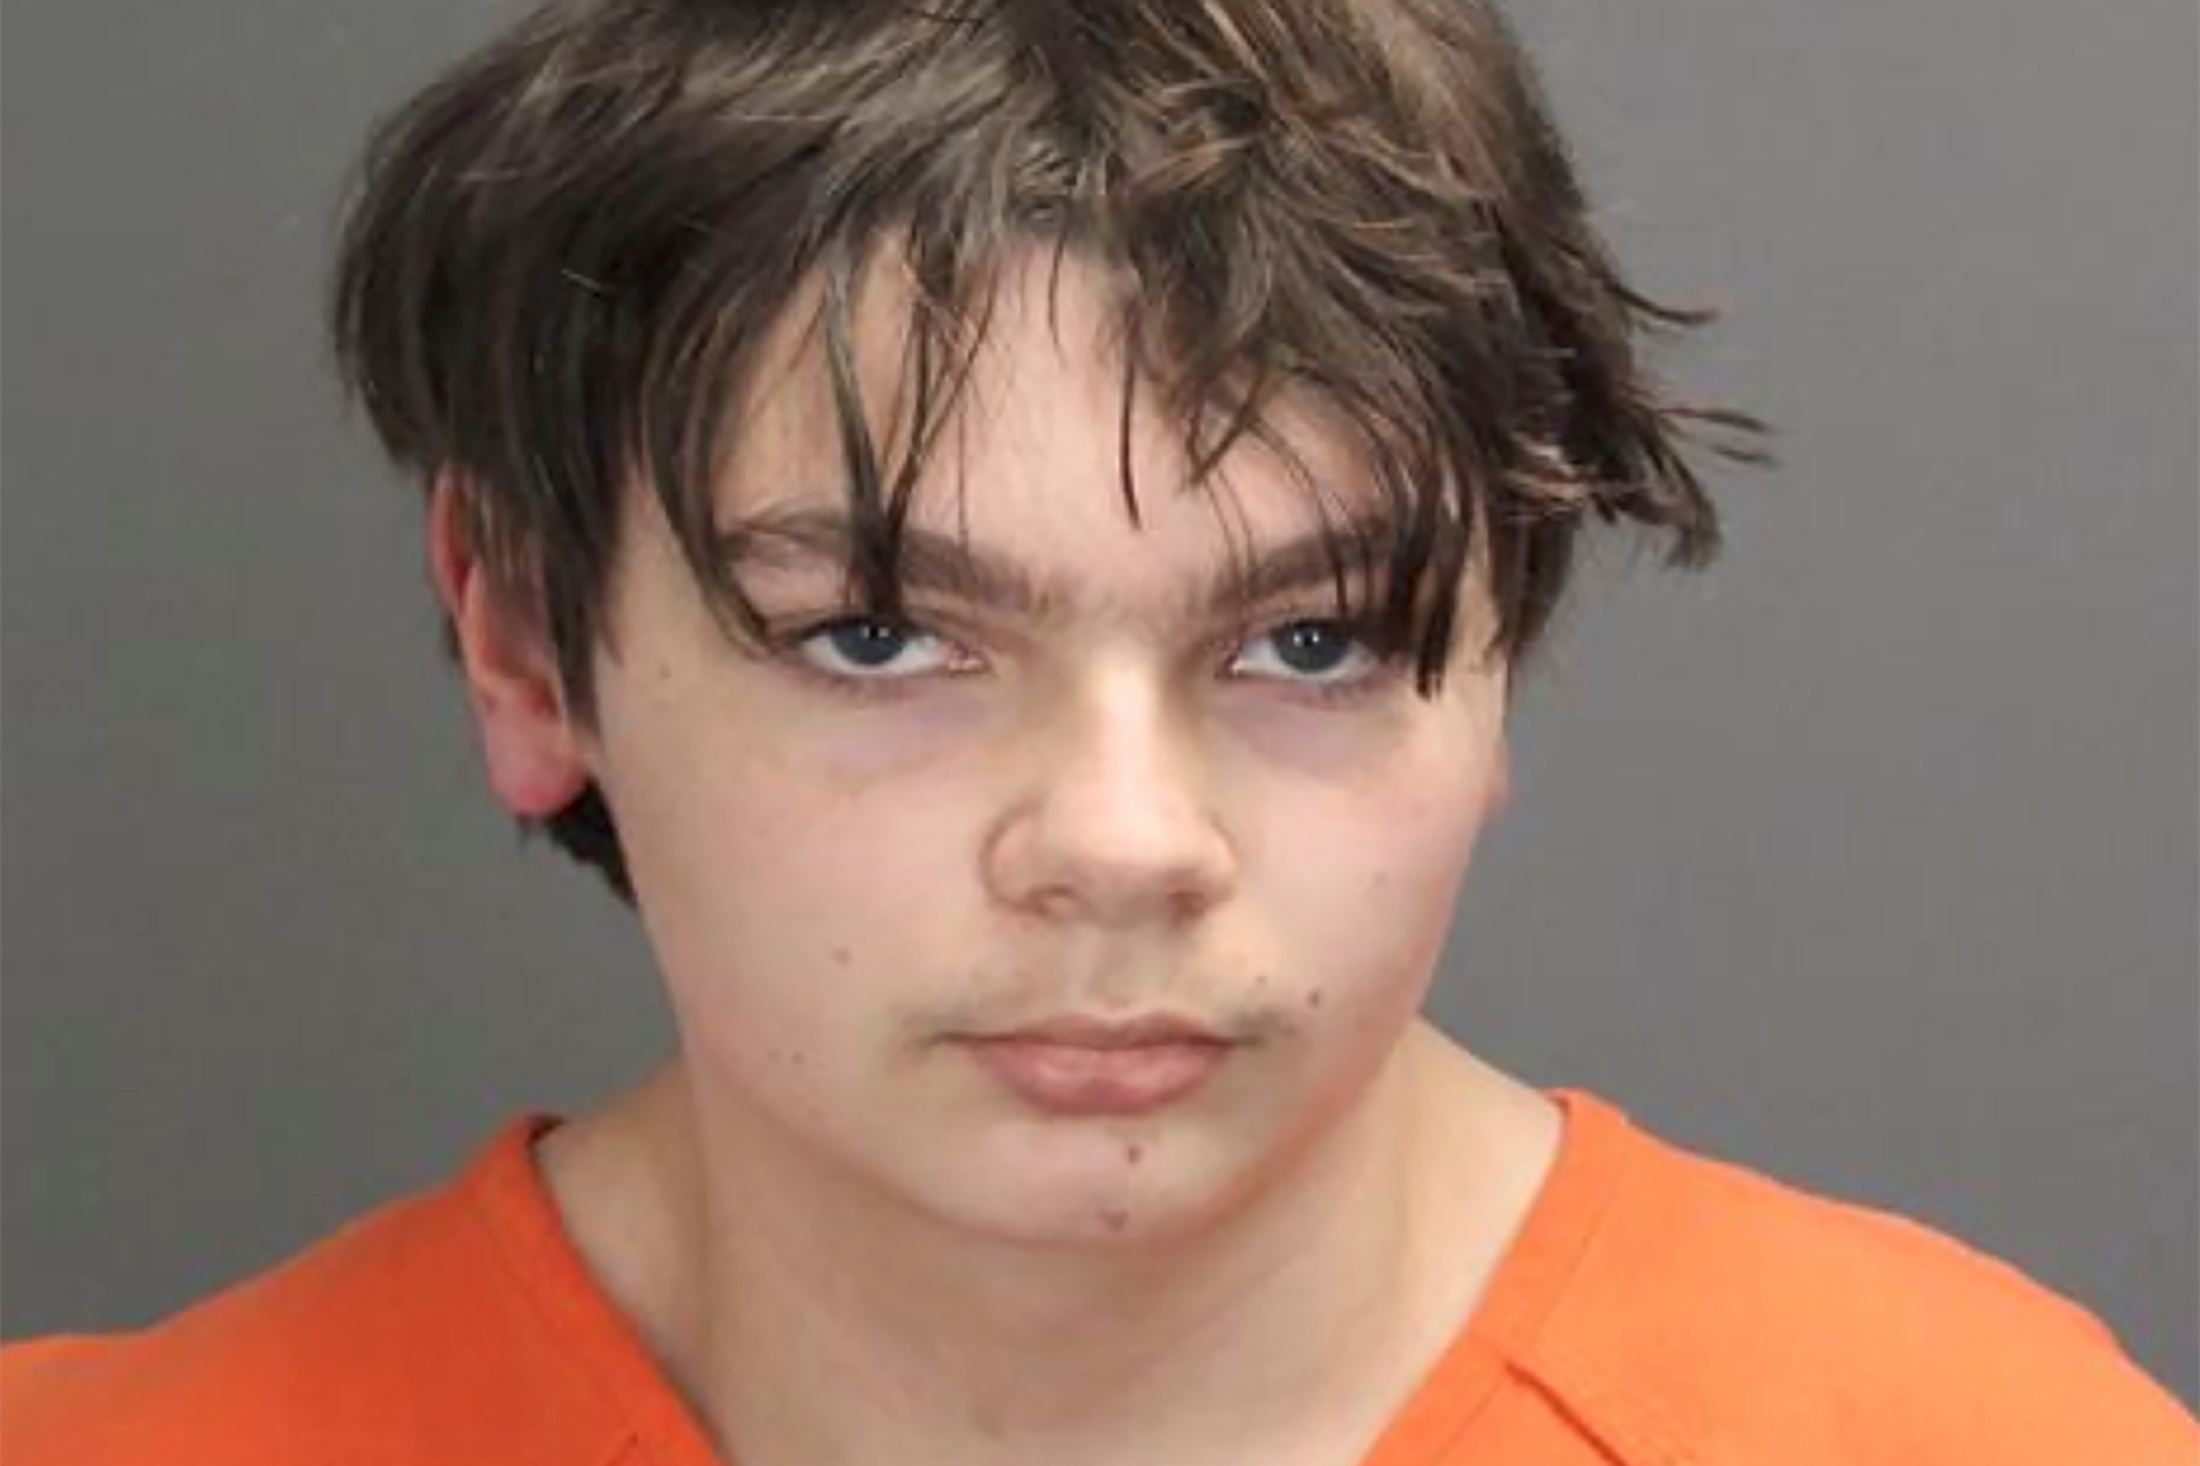 Ethan Crumbley, 15, charged with murder and terrorism for killing four classmates at Oxford High School in Michigan (Oakland County Sheriff's Office/REUTERS)